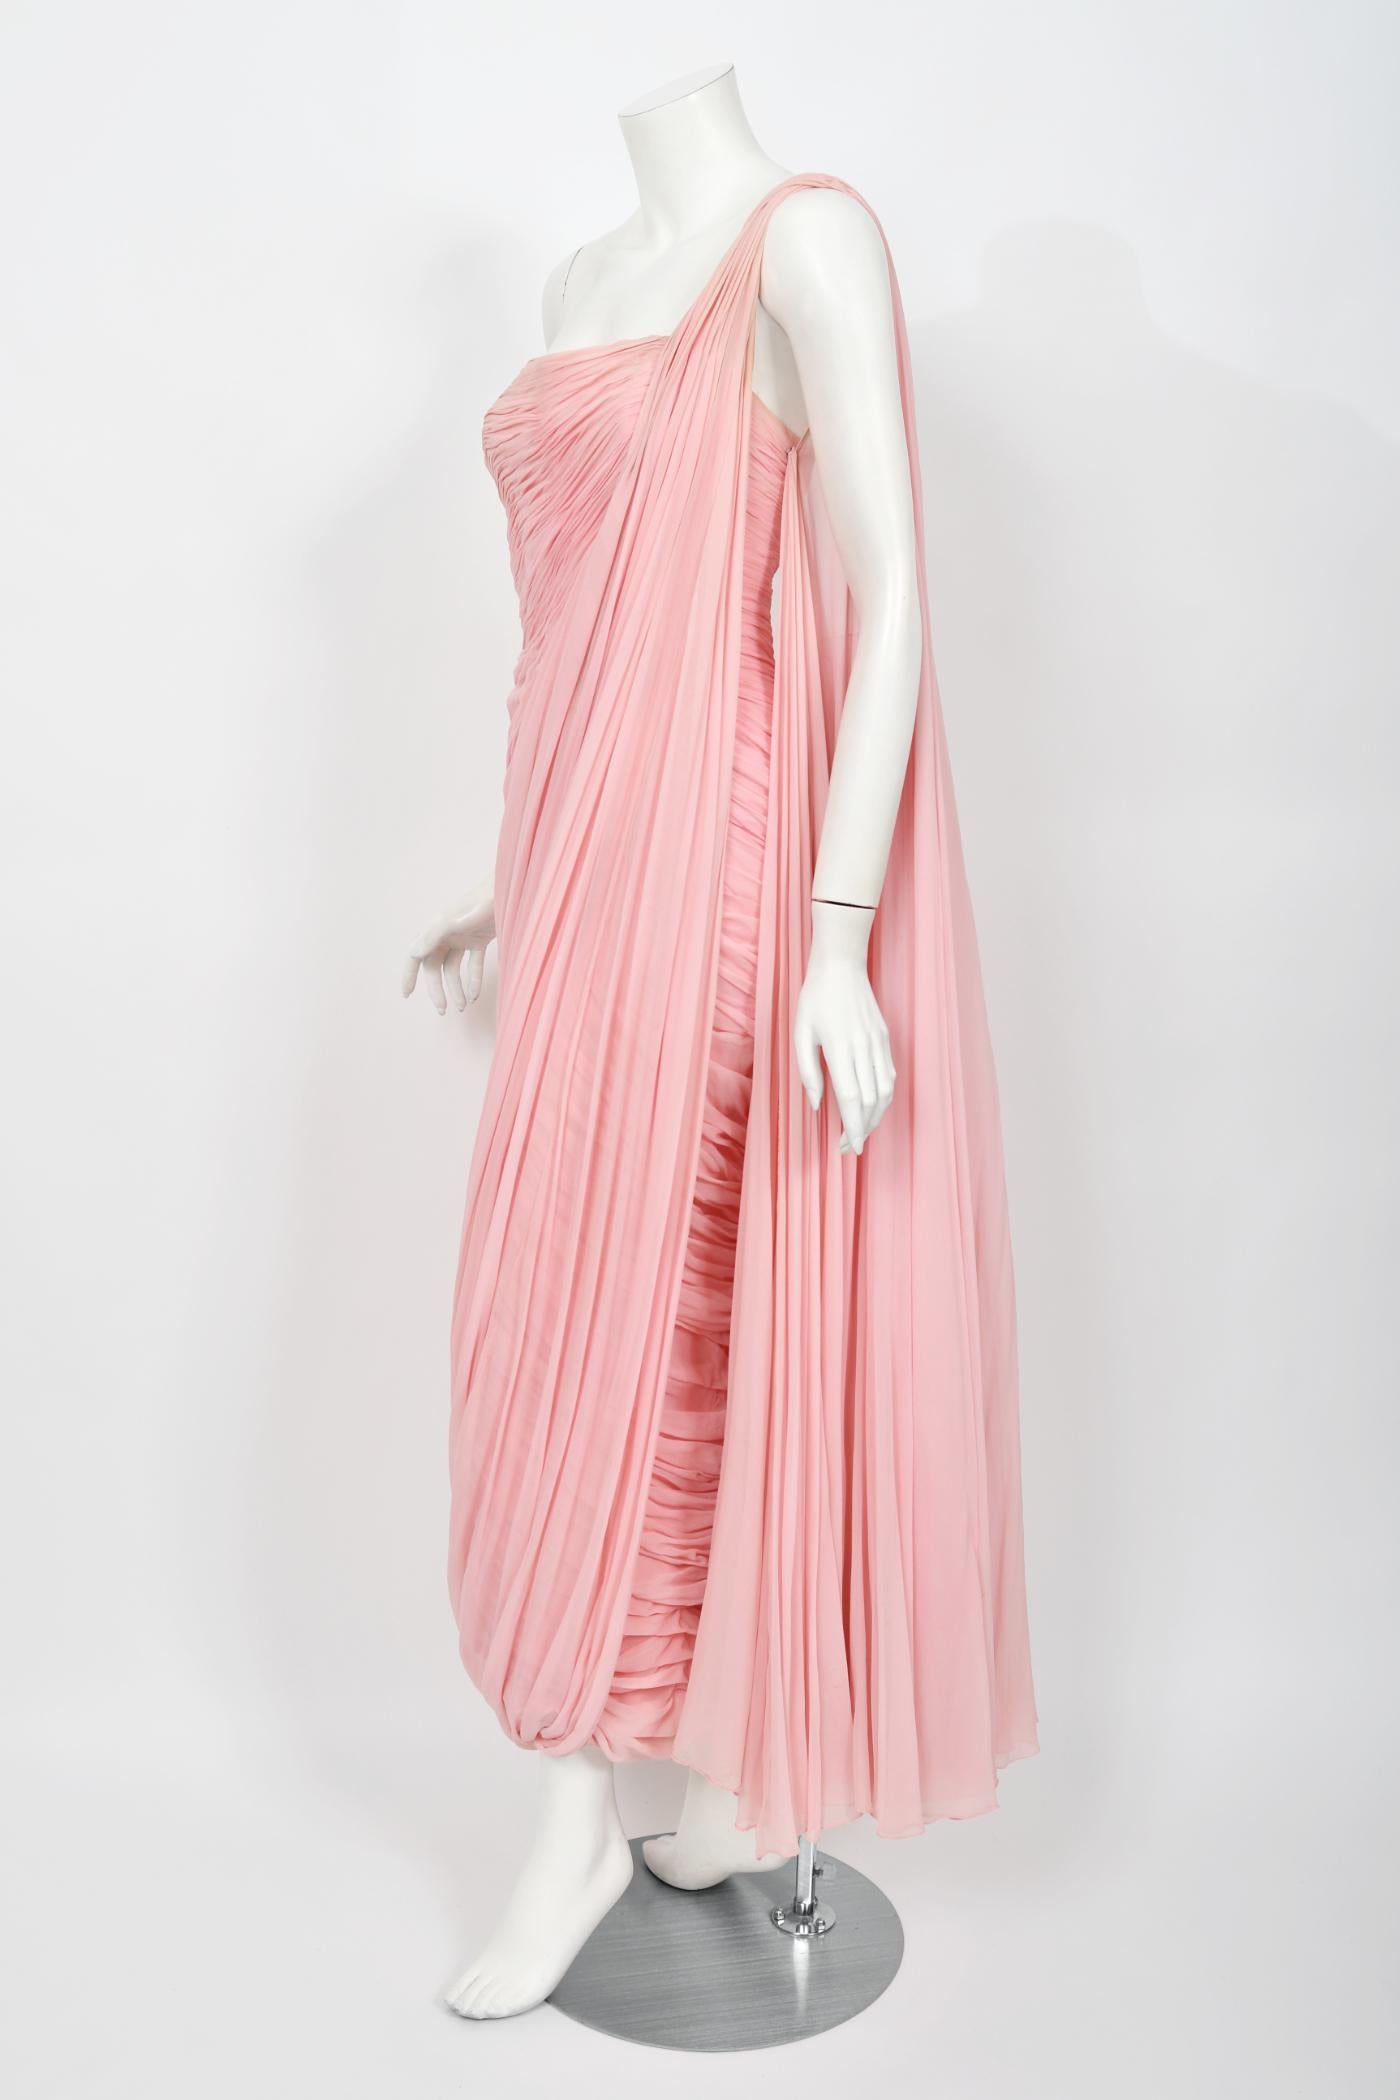 1958 Jean Dessès Haute Couture Documented Pink Ruched Silk Chiffon Goddess Gown For Sale 5